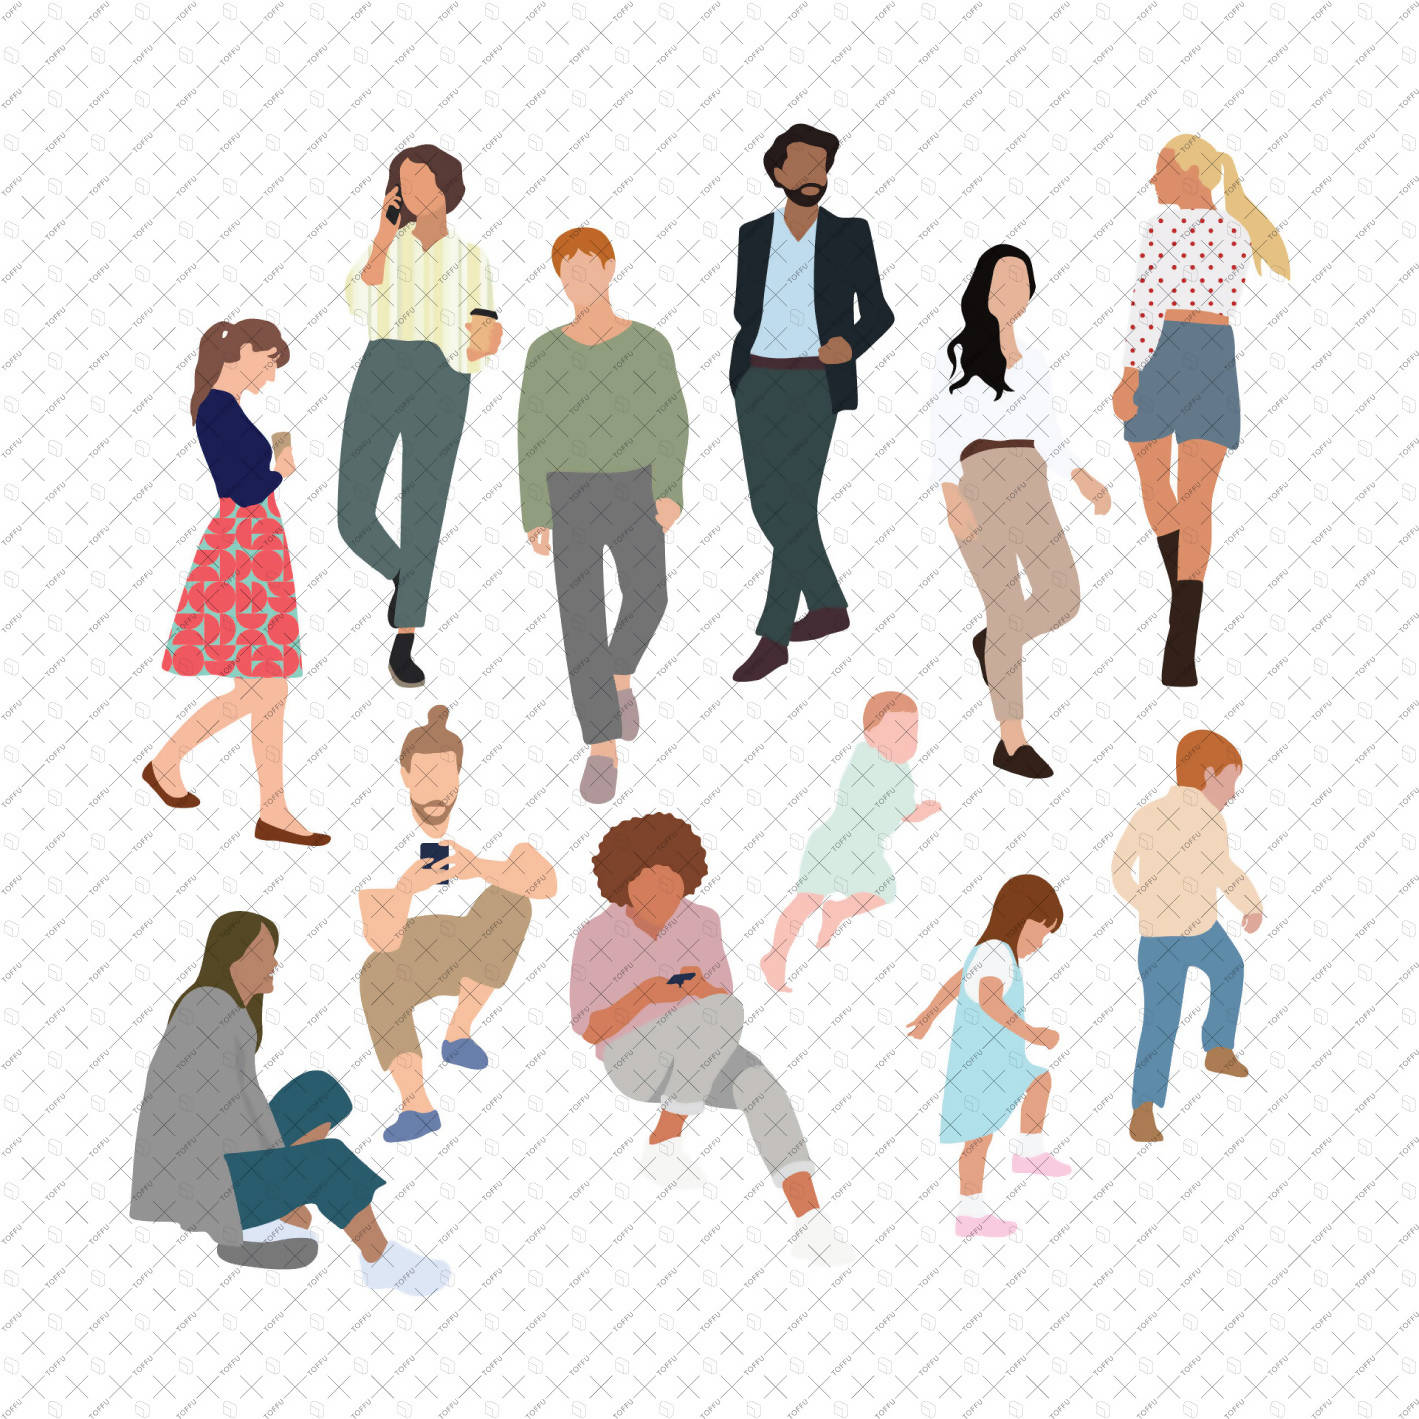 People Silhouettes And Outlines Vector Art & Graphics